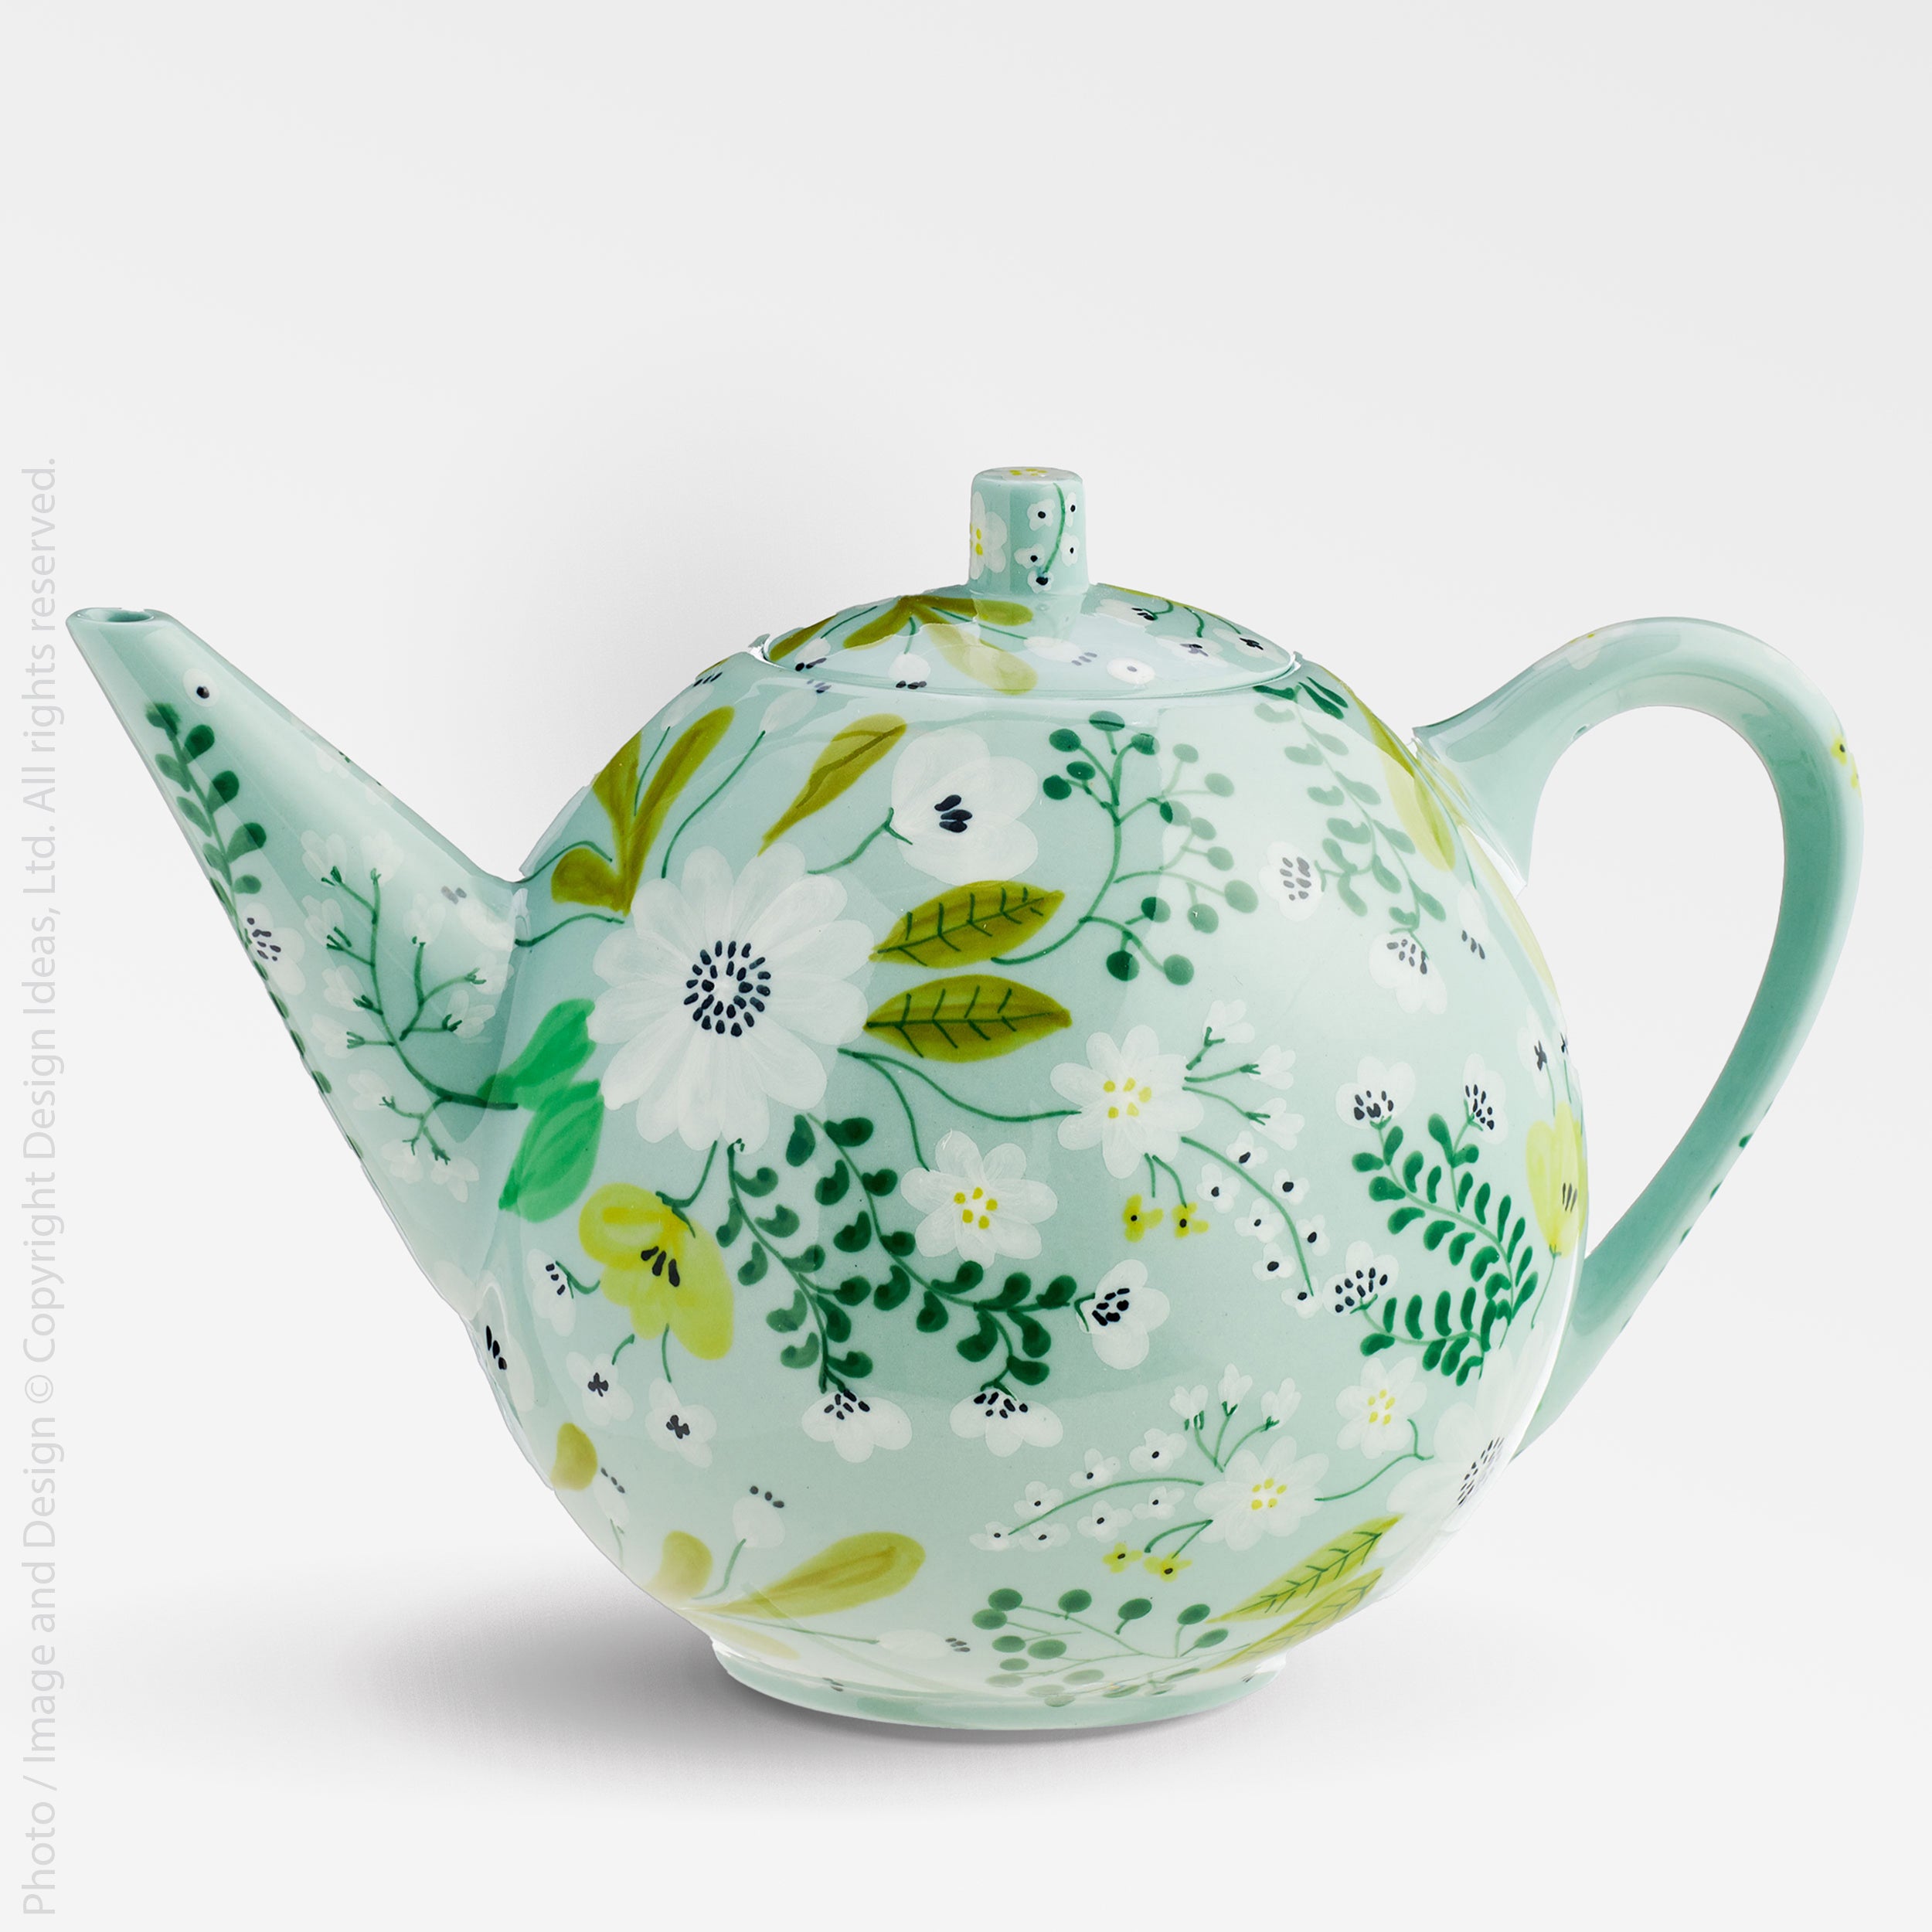 Bloomsbury™ teapot - Mint | Image 1 | Premium Tea Pot from the Bloomsbury collection | made with Kaolin clay for long lasting use | texxture